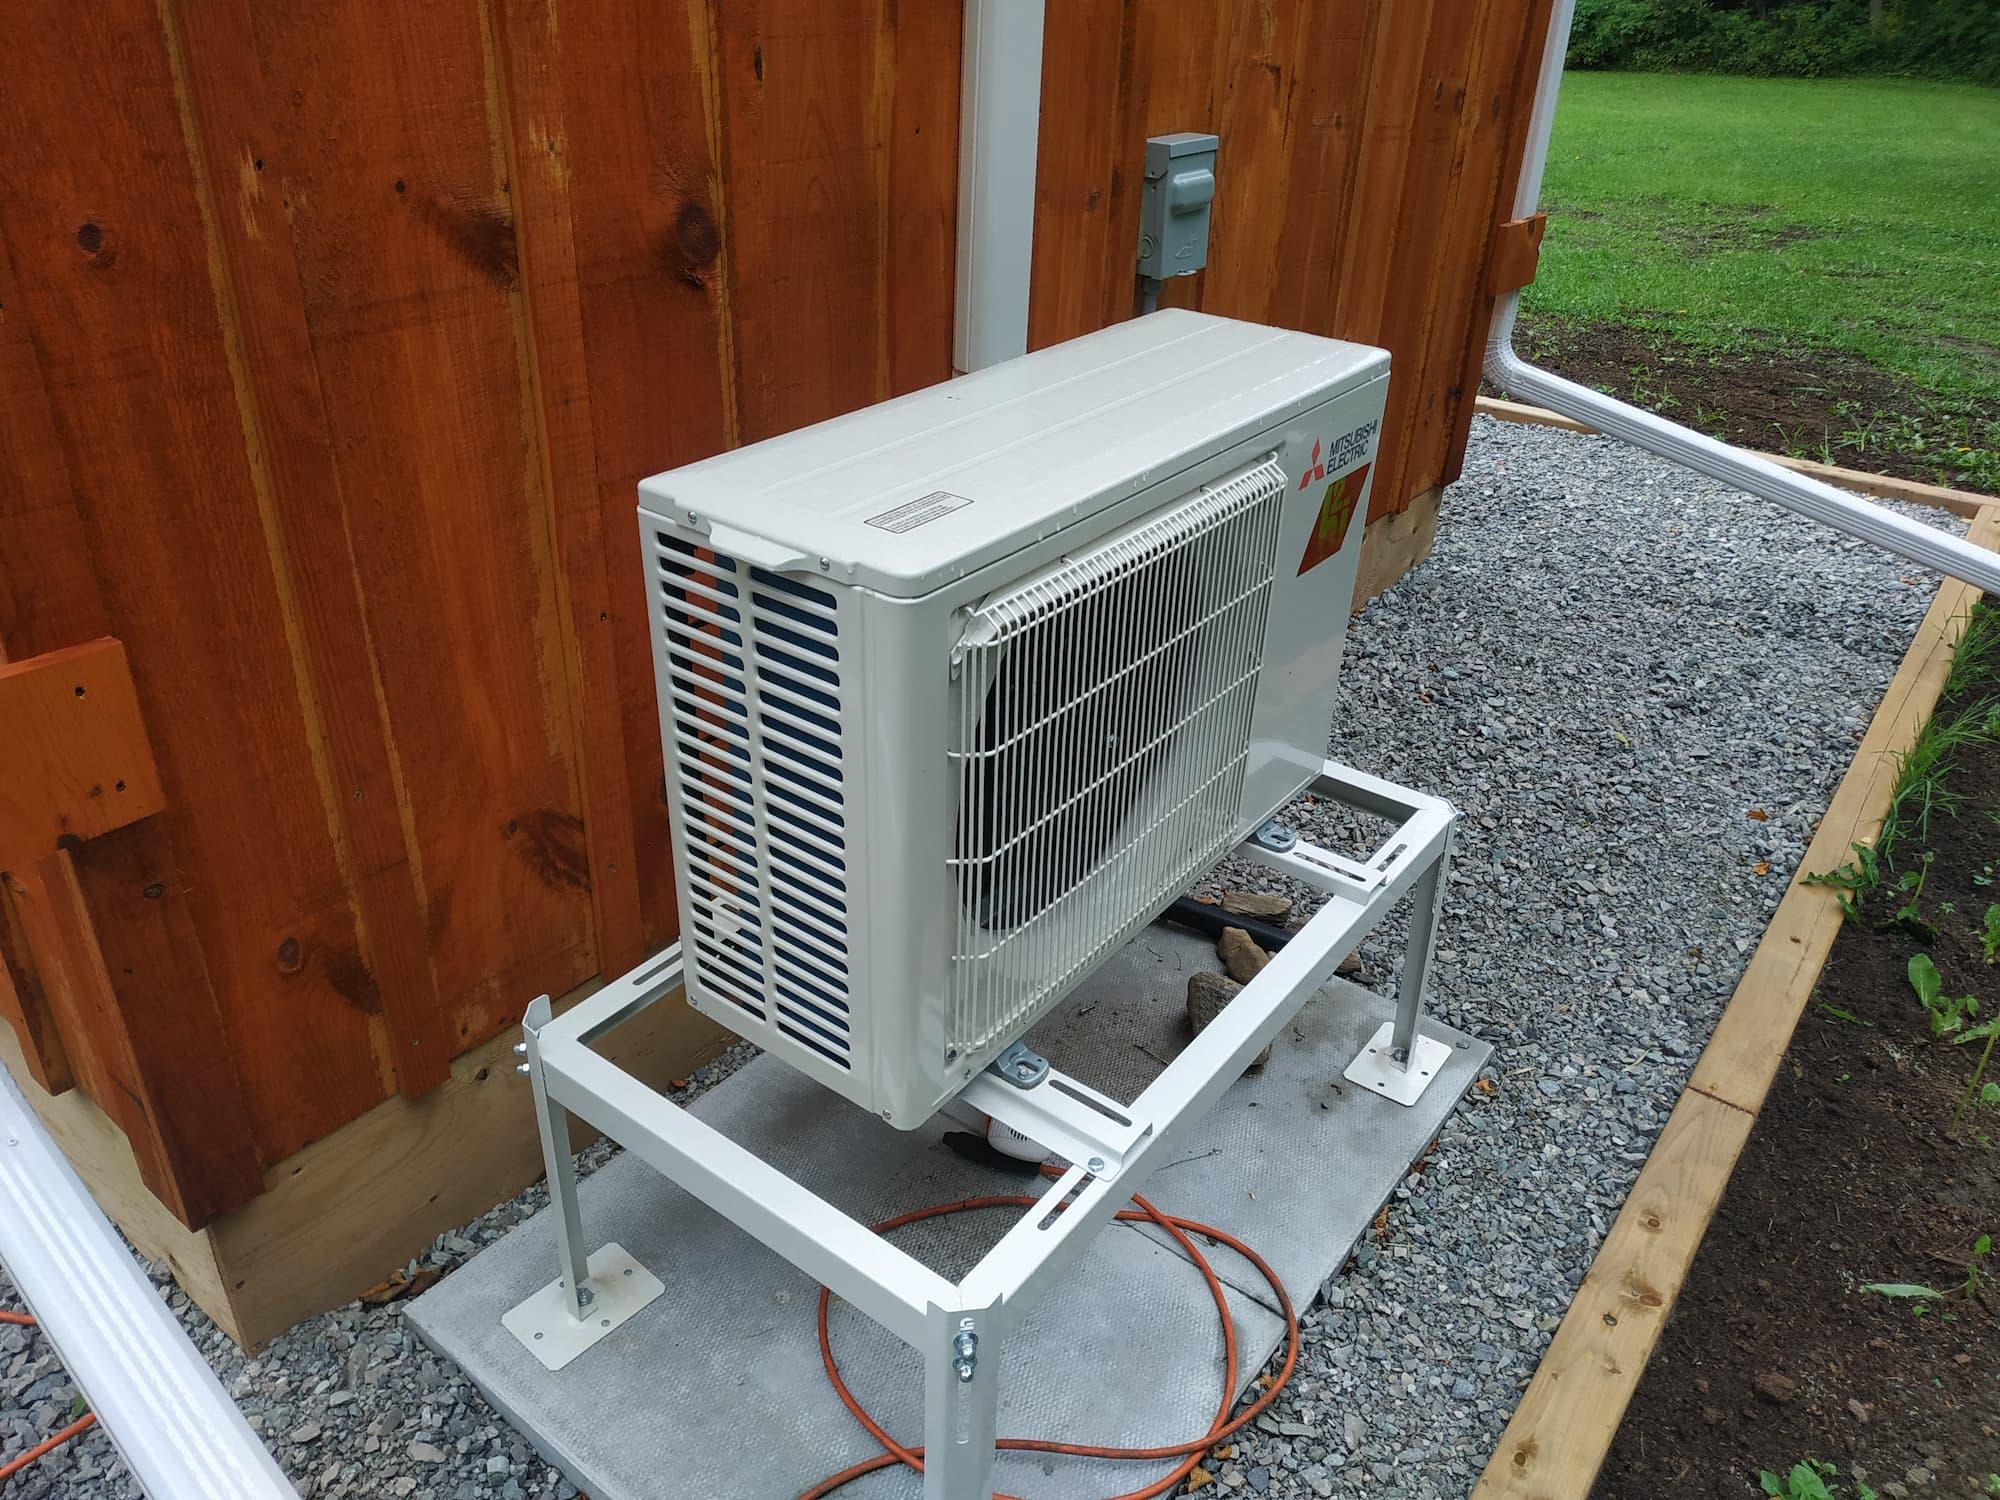 A small heat pump unit is seated on a metal stand, on top of a concrete slab, next to the back wall of my cabin